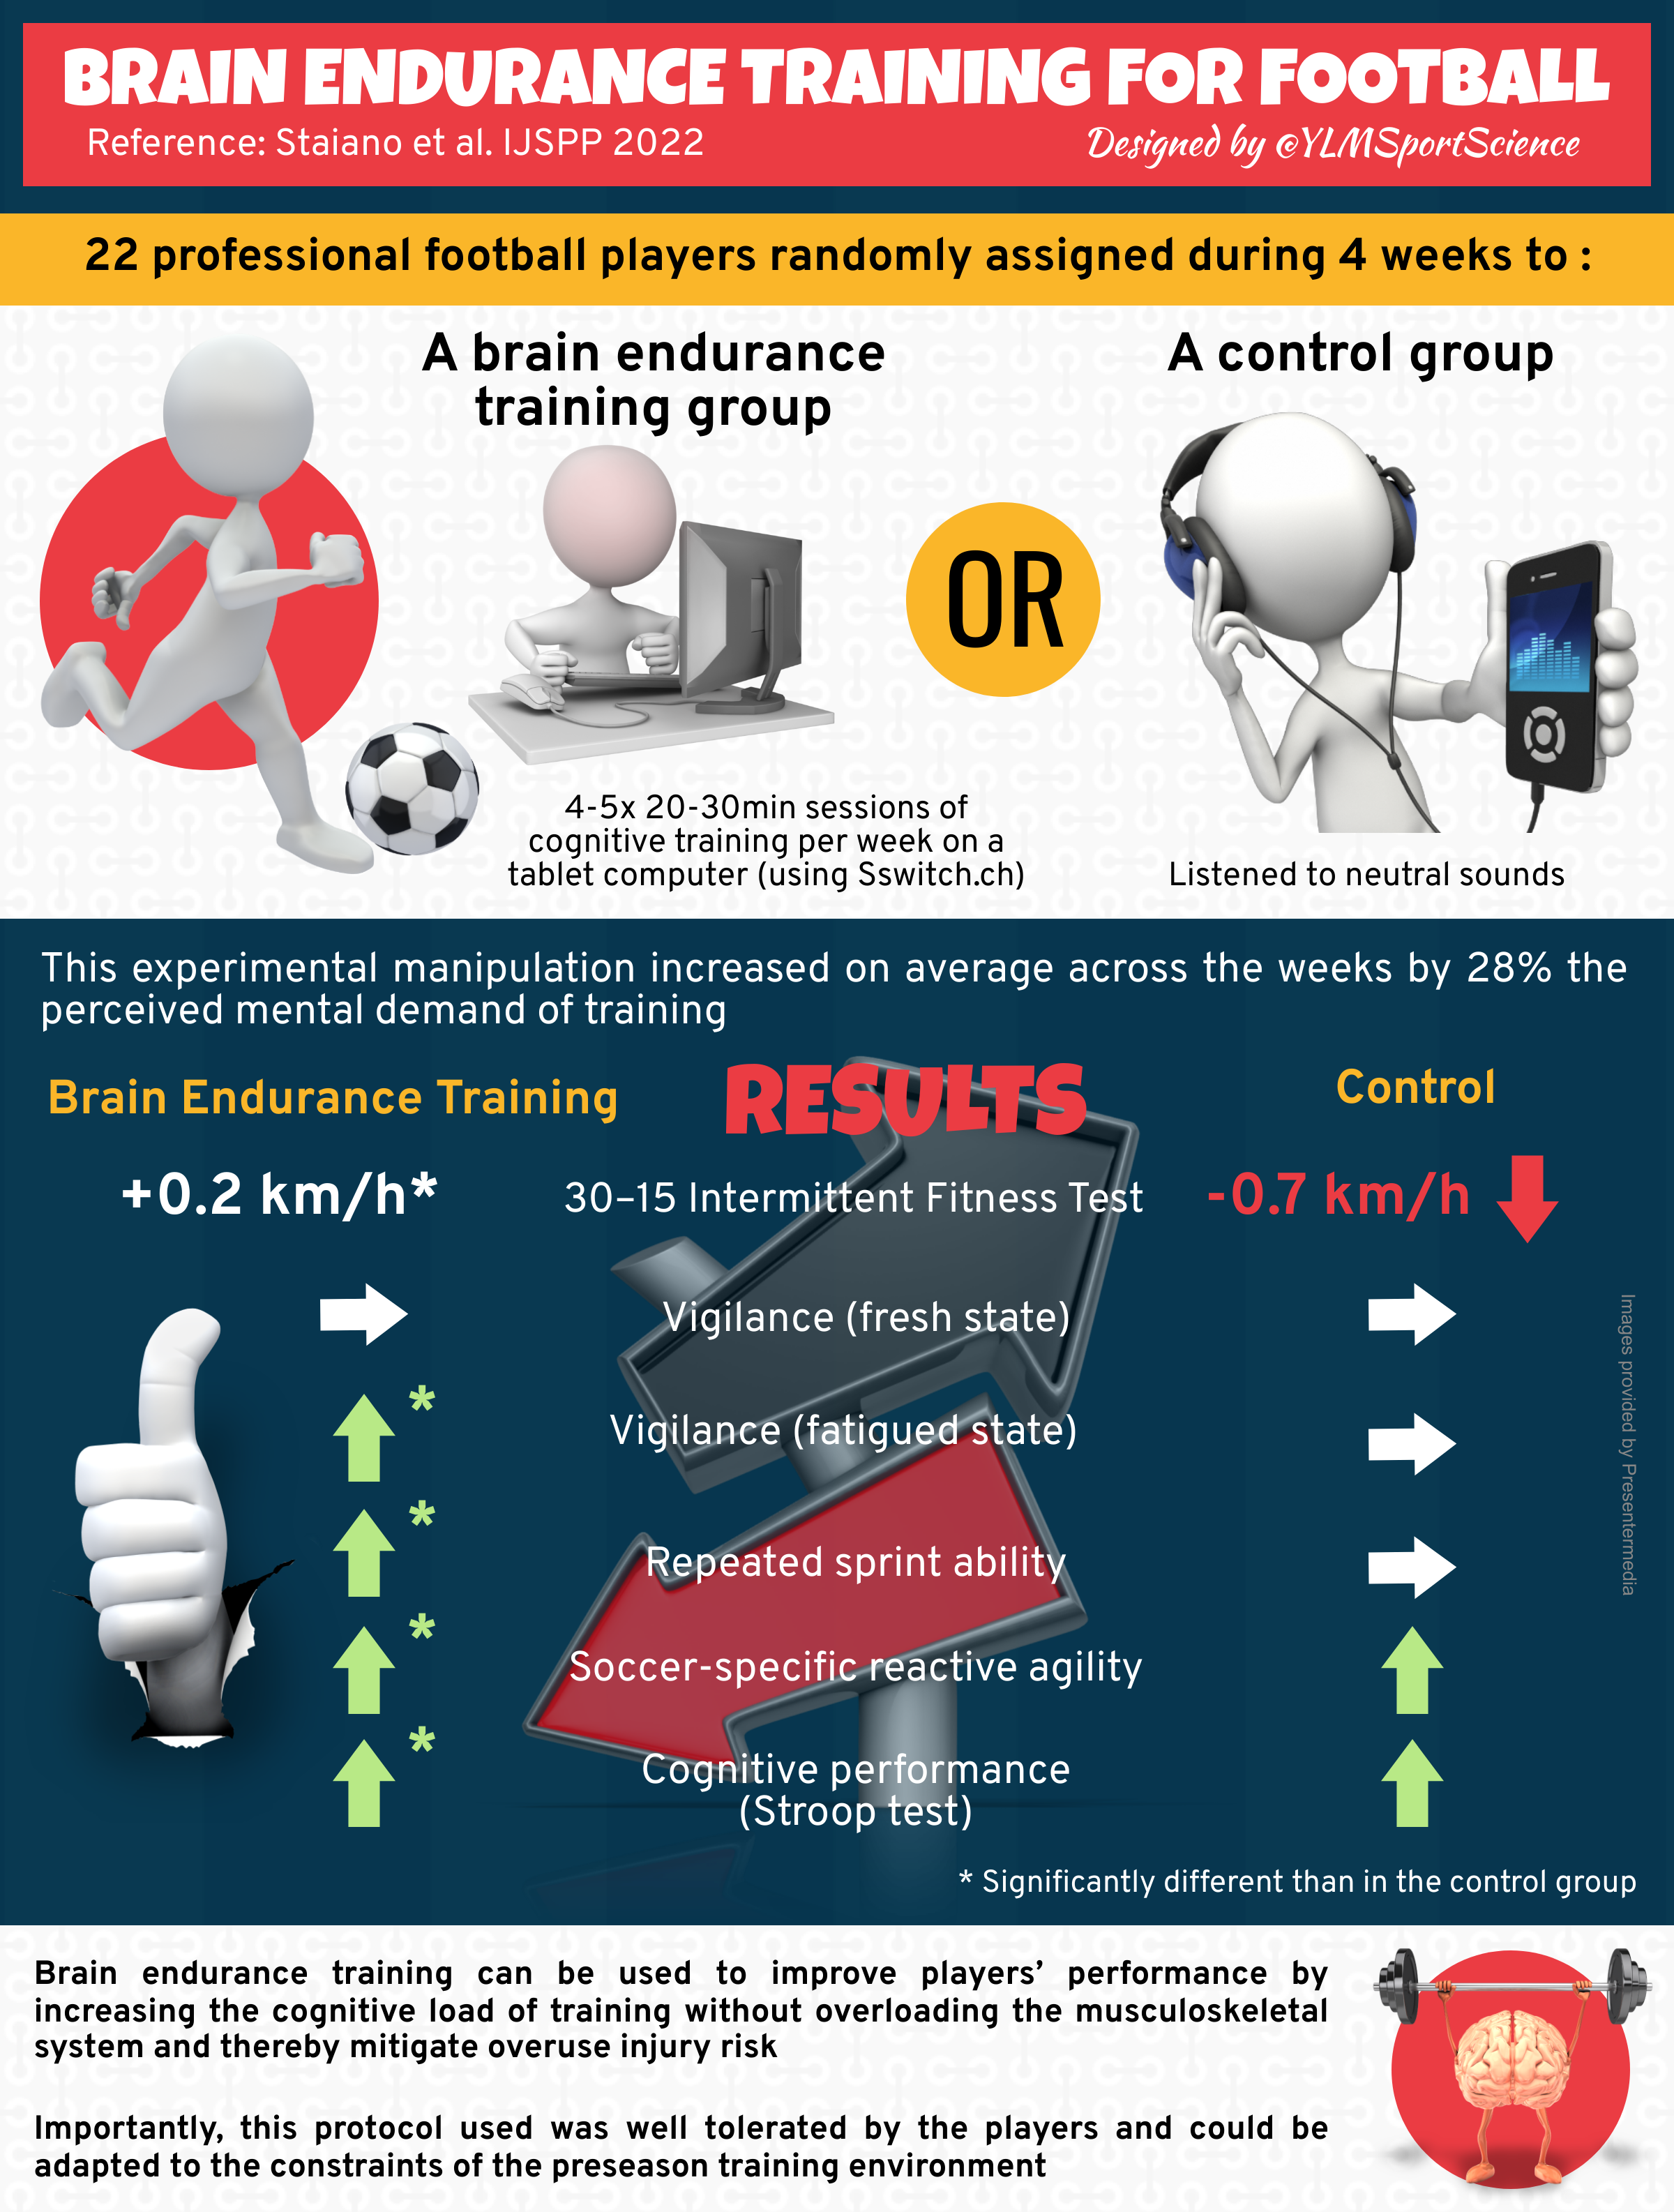 Brain Endurance Training Improves Physical, Cognitive, and Multitasking Performance in Professional Football Players